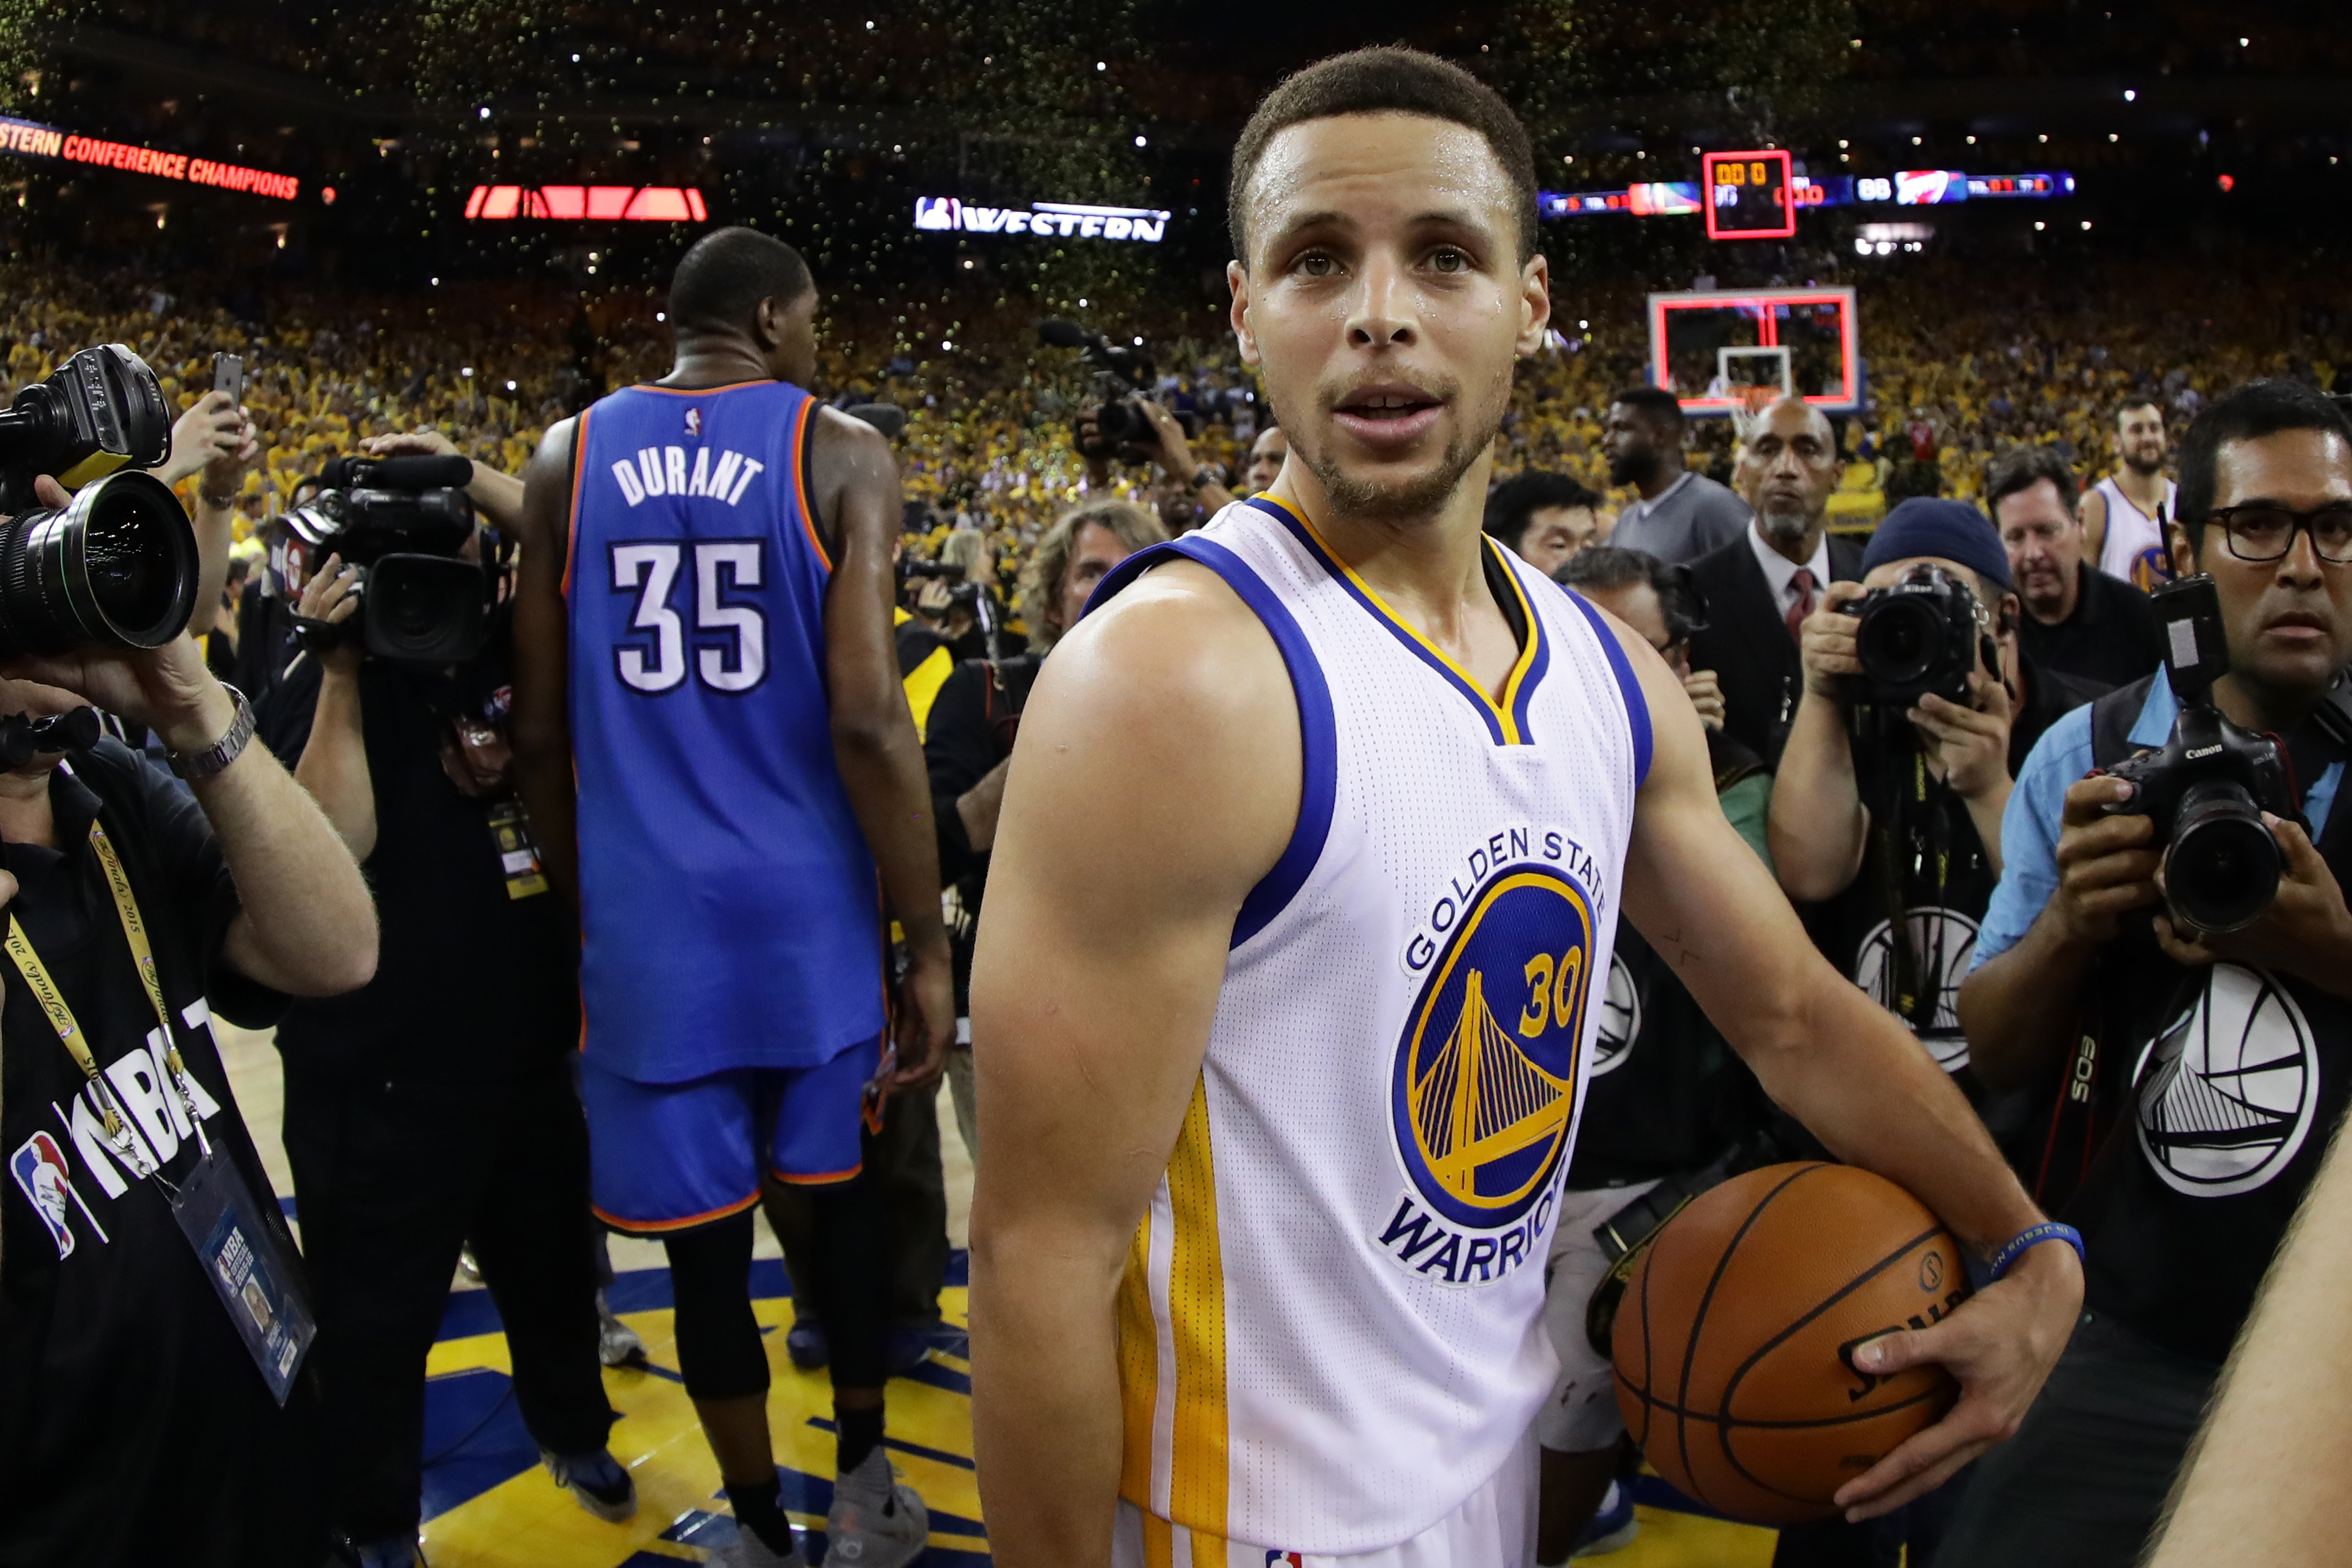 KNBR on X: Stephen Curry's reaction to Klay Thompson's injury